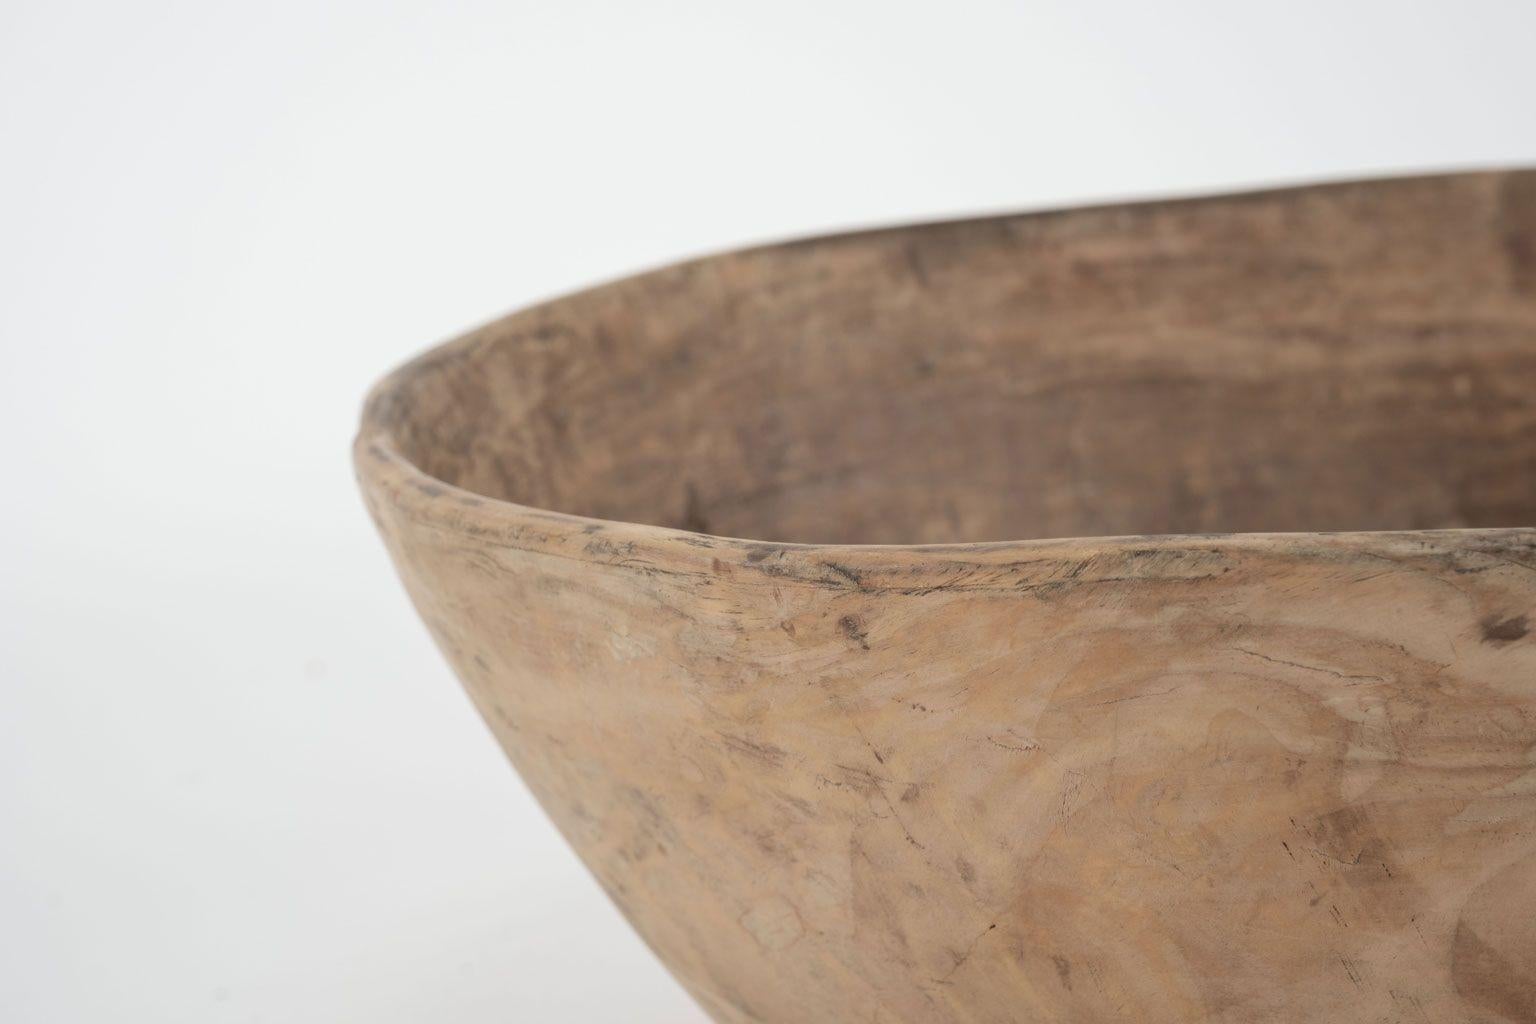 Oval-shaped Swedish root wood bowl: dated 1883 and signed 